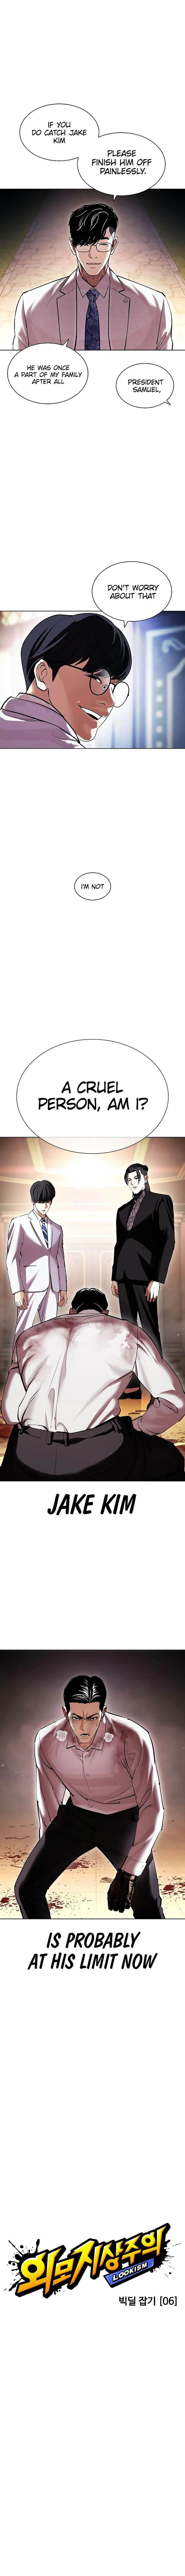 Lookism Chapter 416 image 03